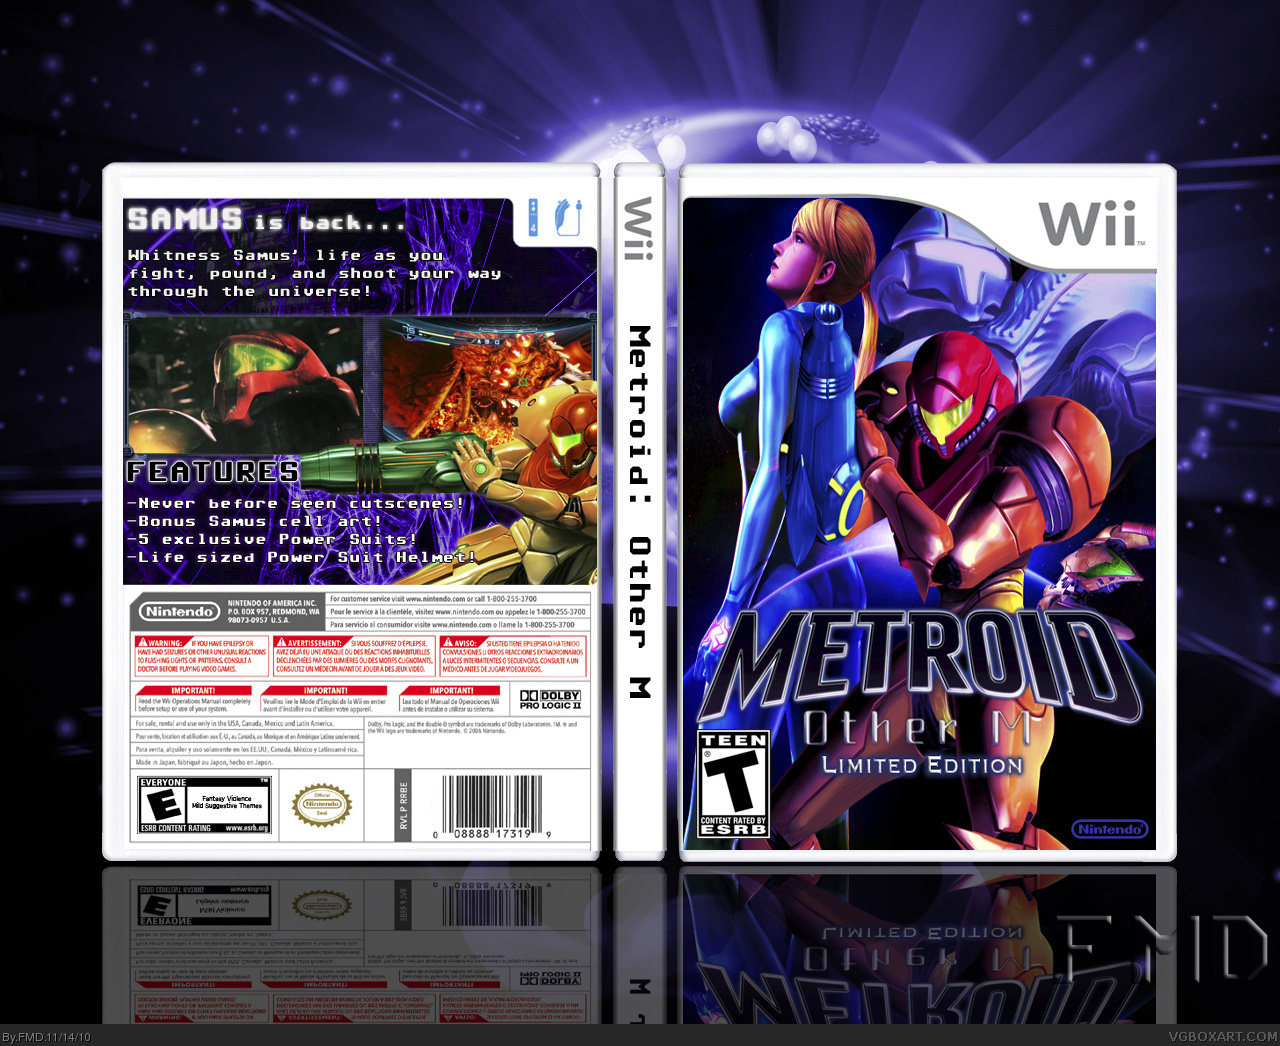 Metroid: Other M Limited Edition box cover